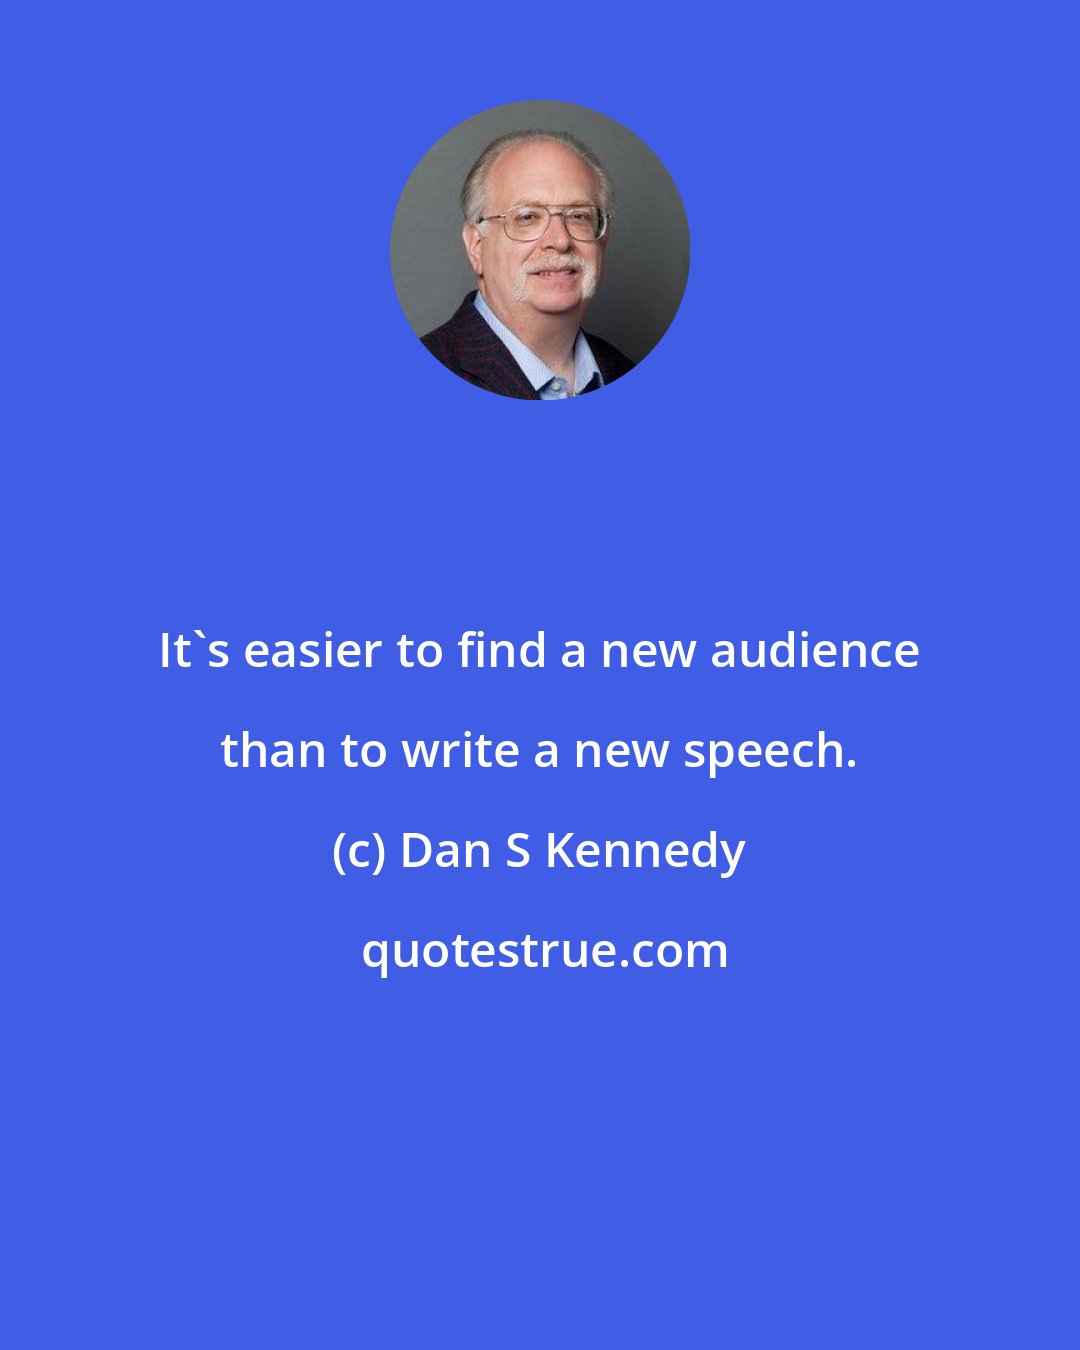 Dan S Kennedy: It's easier to find a new audience than to write a new speech.